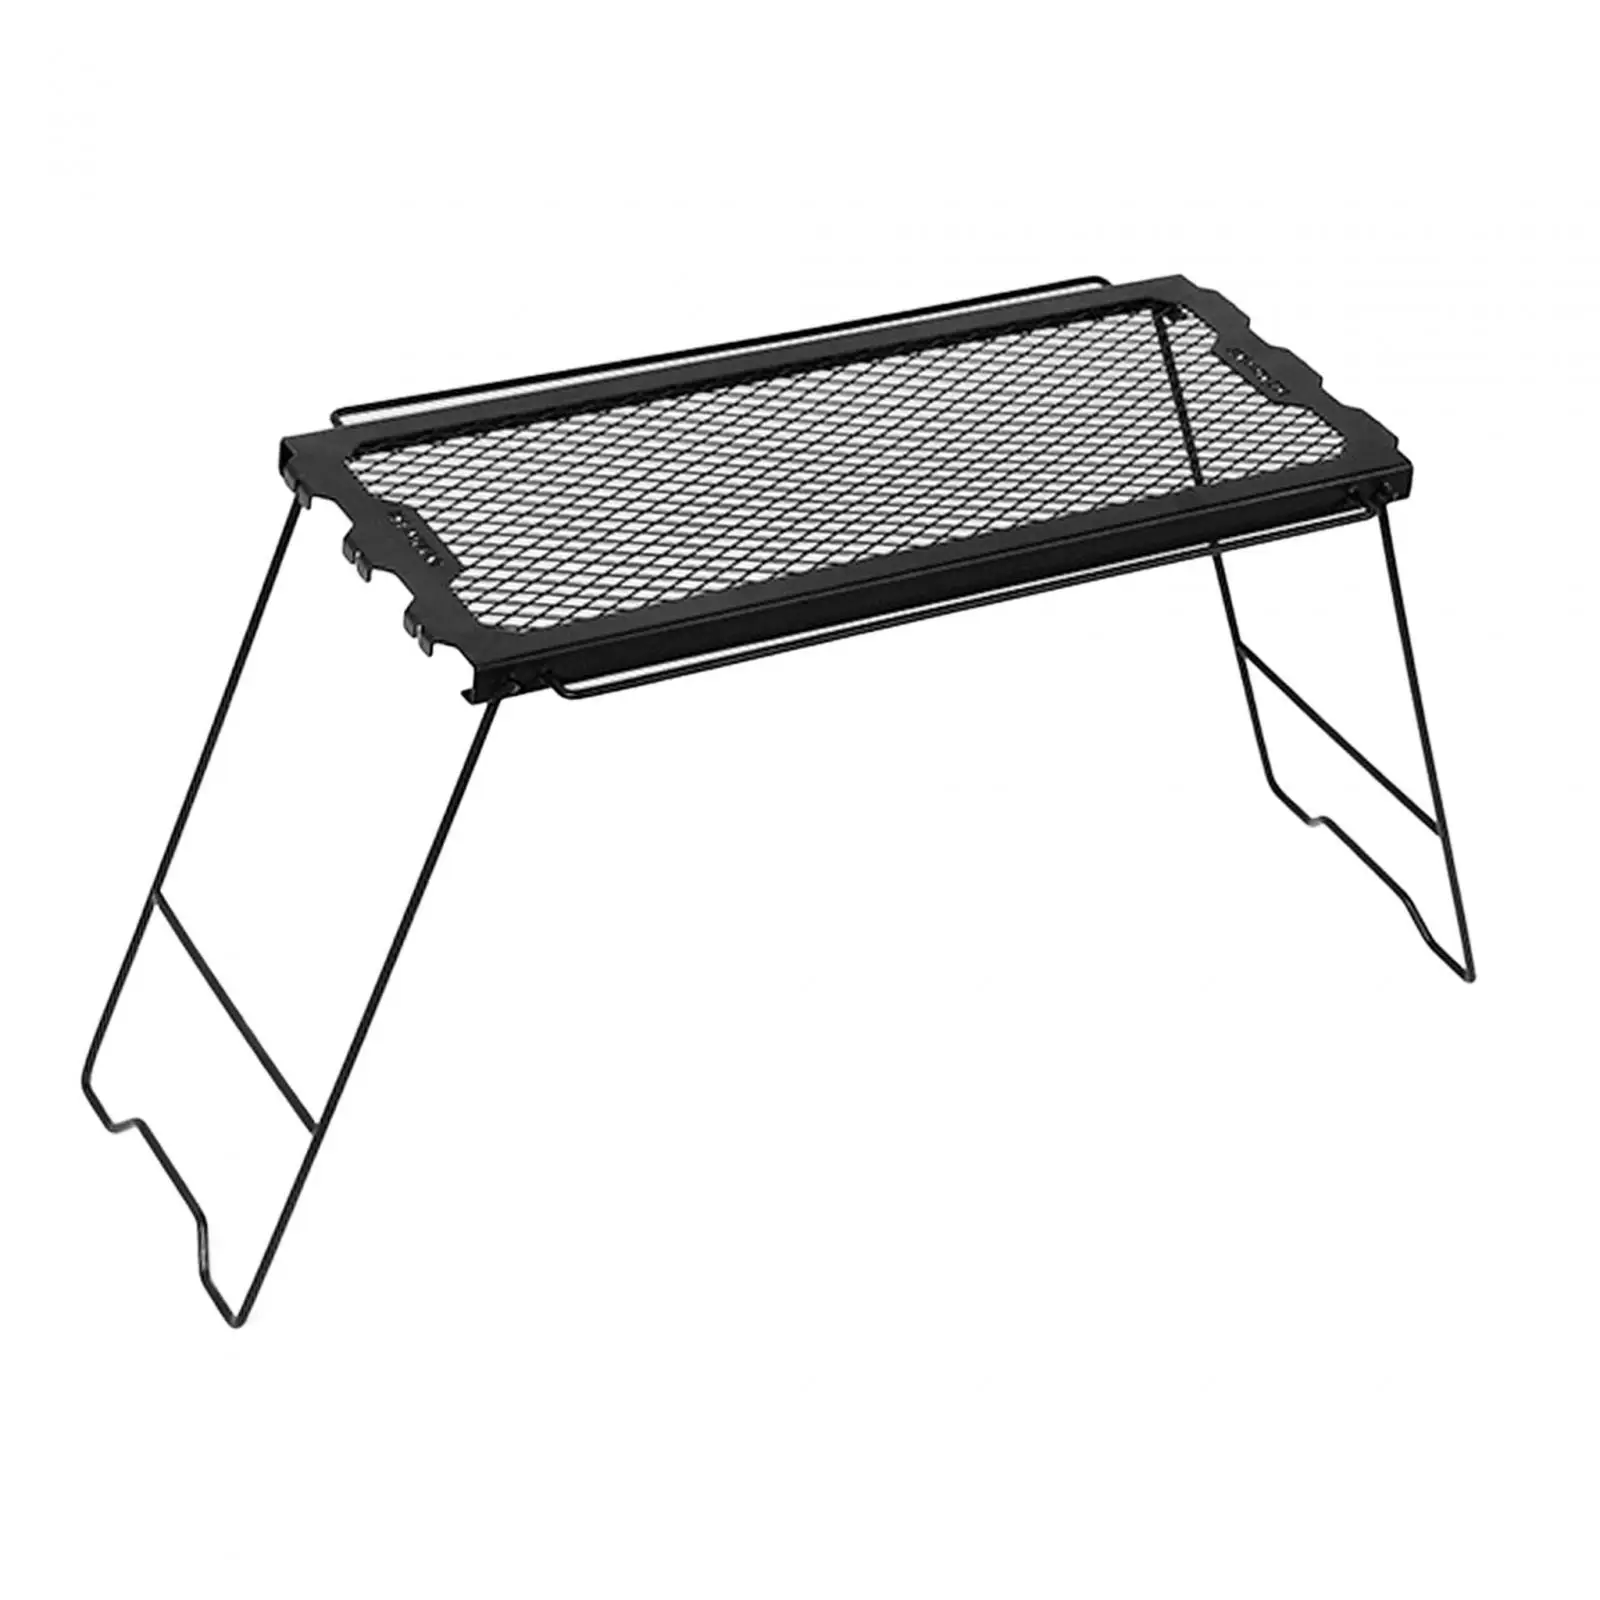 Folding Camping Table, Foldable Campfire Grill with Mesh Desktop, Compact Camping Cooking Grate over Fire for Hiking, BBQ